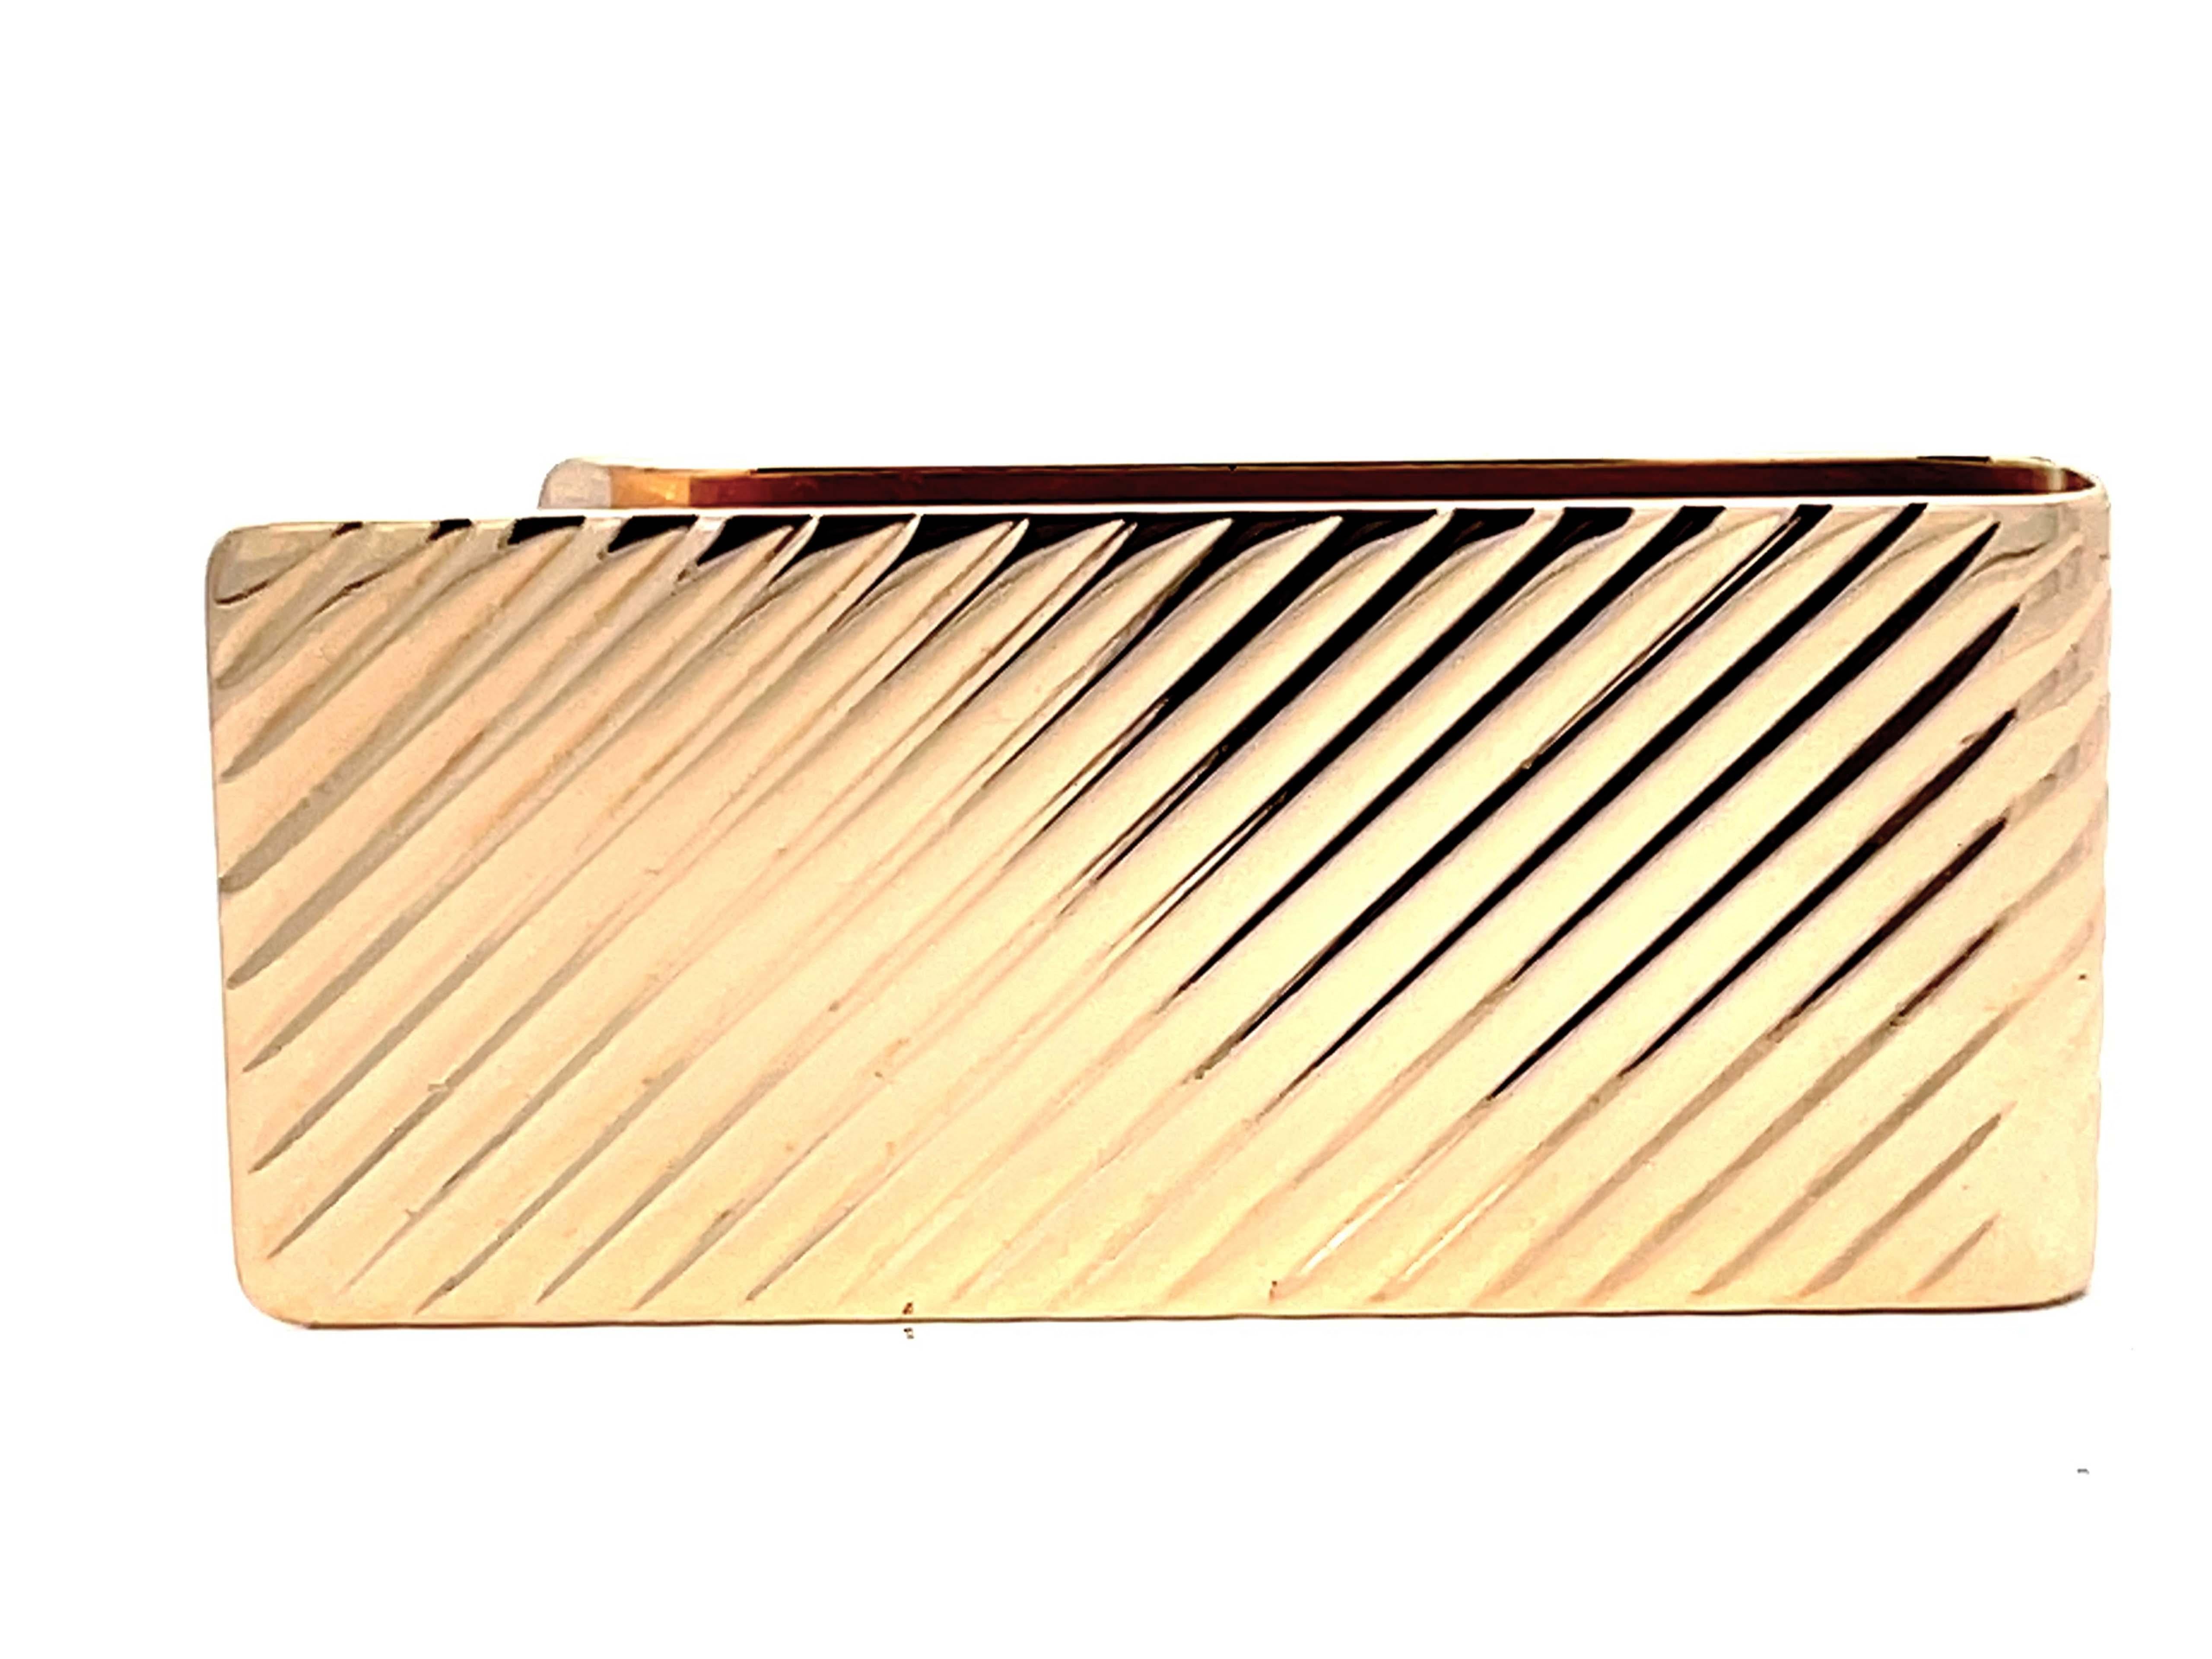 Item Specifications:

Brand: Tiffany & Co.

Style: Money Clip

Metal: 14k yellow gold

Measurements: 2.2